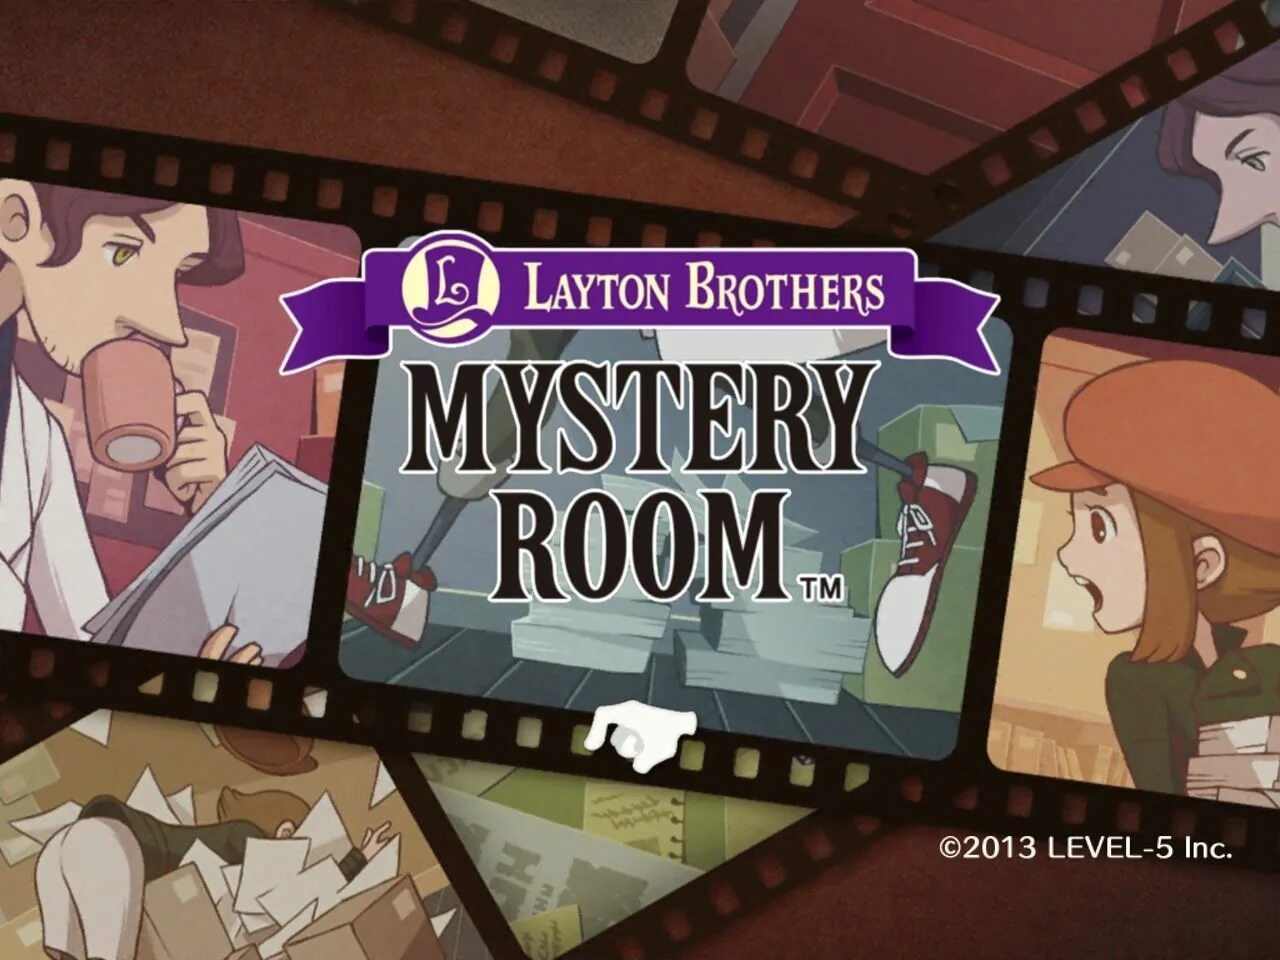 Sam plays the game. Brothers' Room. Mystery Room. Layton Green brothers three. Румс кейс игра.